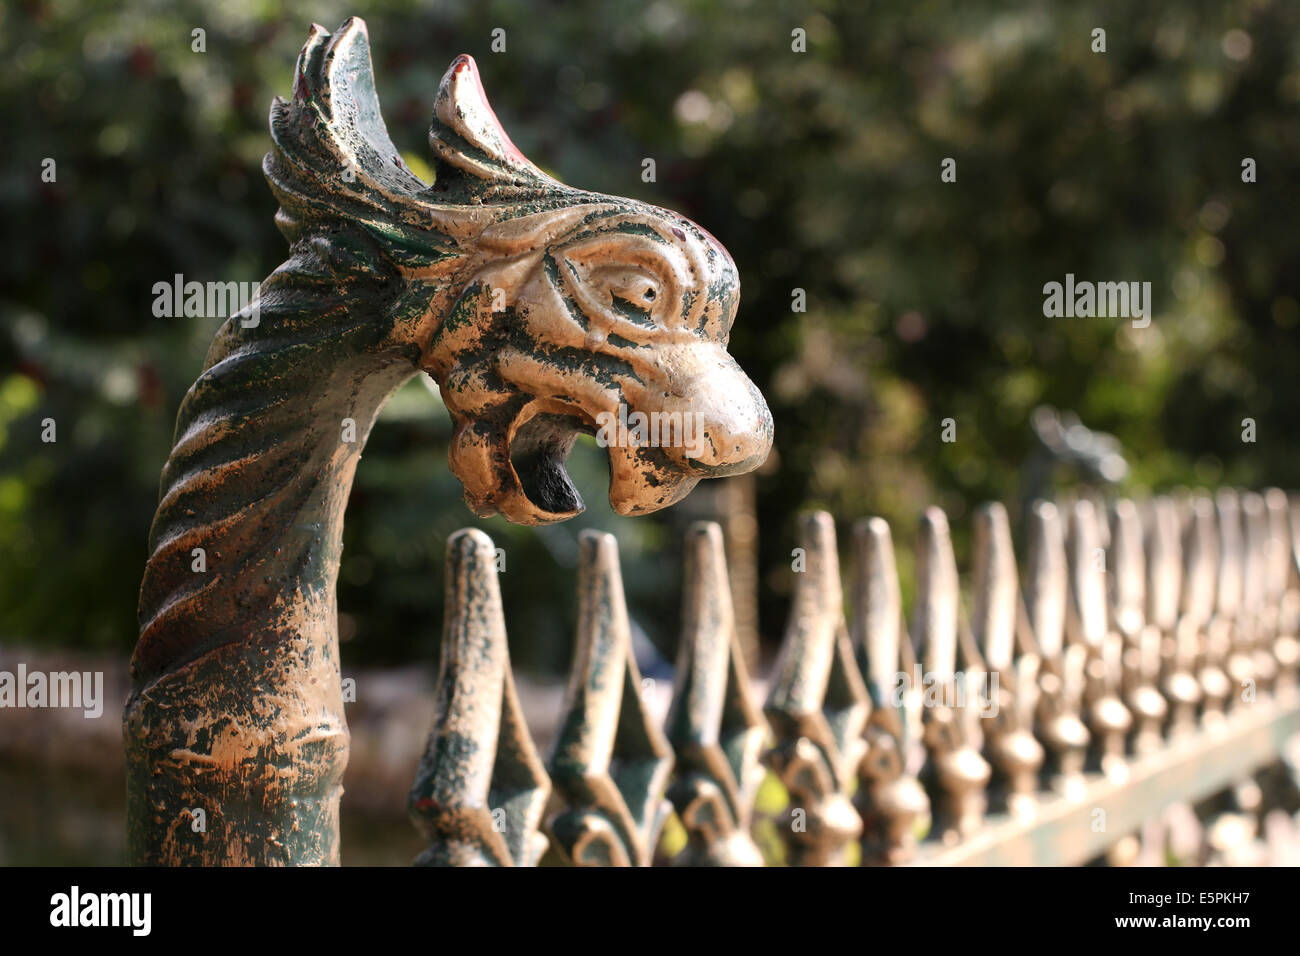 A fence with beautiful ornaments Stock Photo